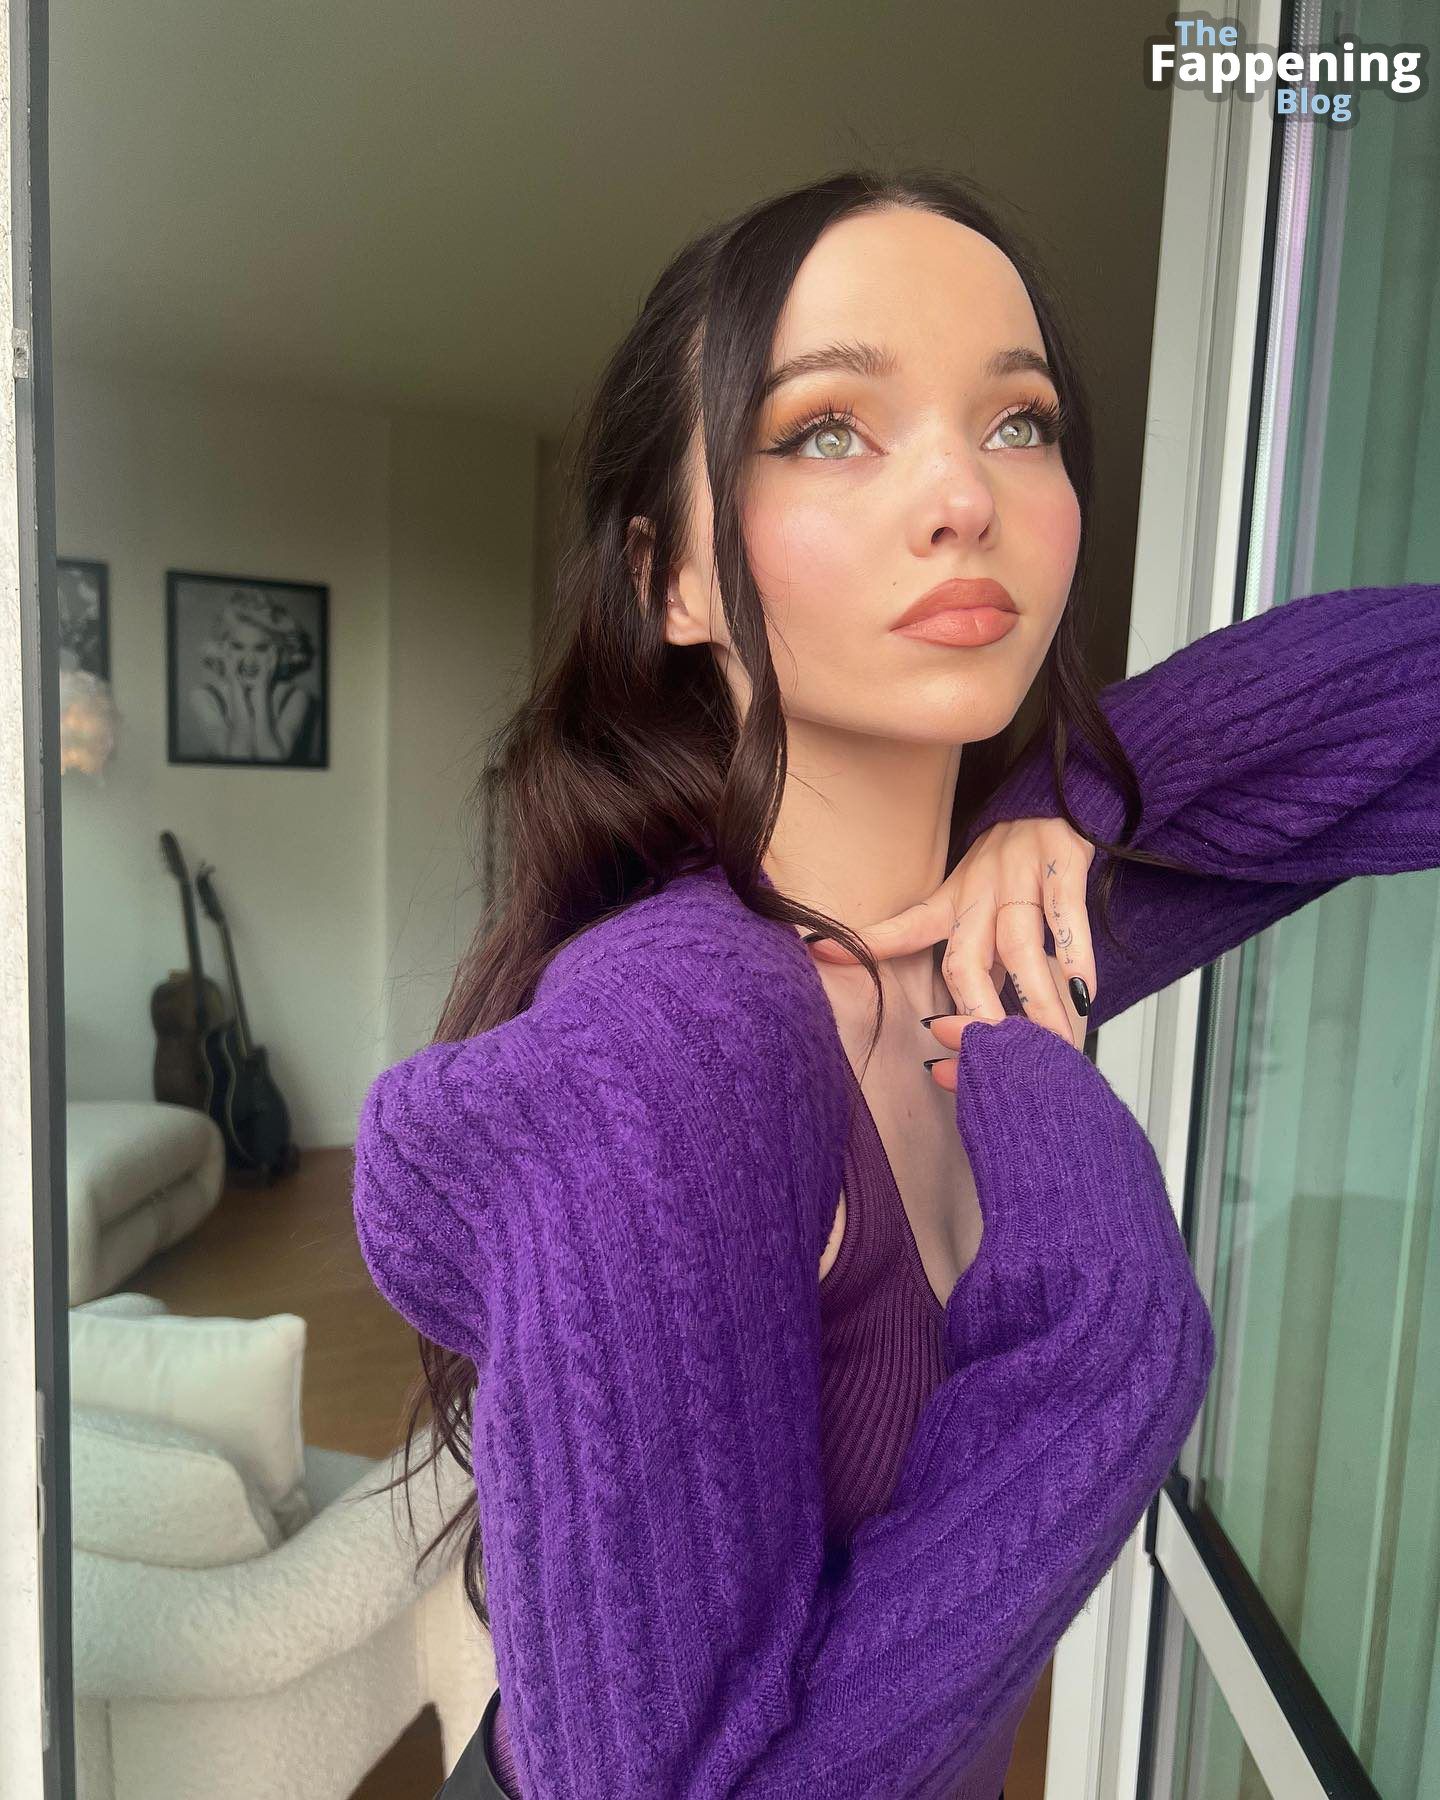 Dove Cameron Poses in a Purple Top for Her Followers.jpg